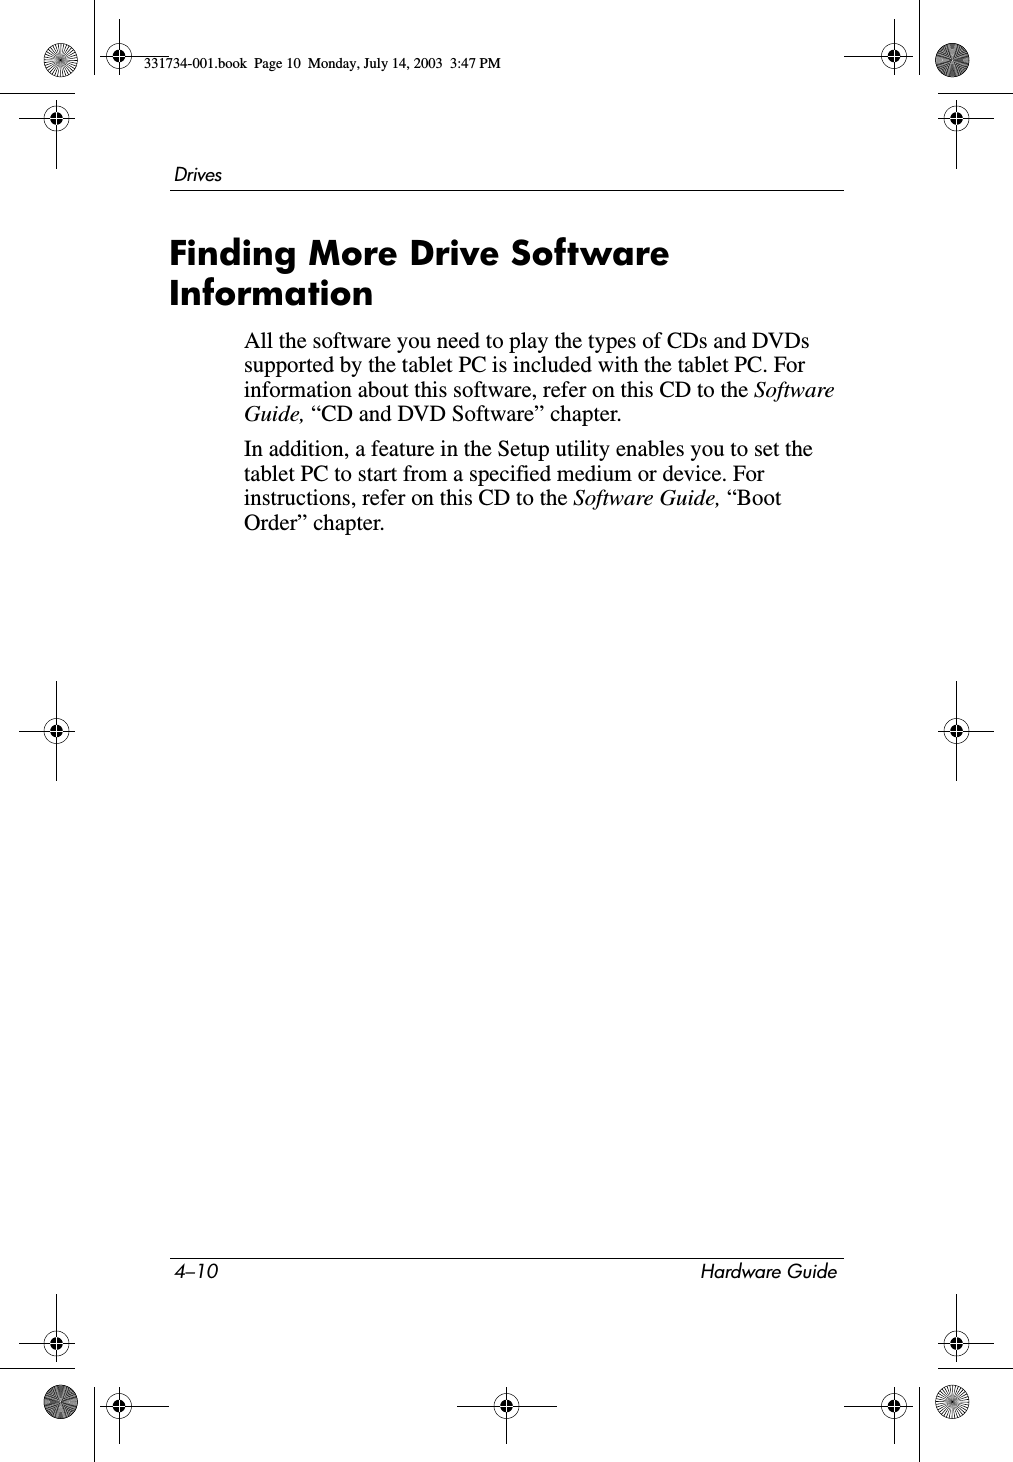 4–10 Hardware GuideDrivesFinding More Drive Software InformationAll the software you need to play the types of CDs and DVDs supported by the tablet PC is included with the tablet PC. For information about this software, refer on this CD to the Software Guide, “CD and DVD Software” chapter.In addition, a feature in the Setup utility enables you to set the tablet PC to start from a specified medium or device. For instructions, refer on this CD to the Software Guide, “Boot Order” chapter.331734-001.book  Page 10  Monday, July 14, 2003  3:47 PM